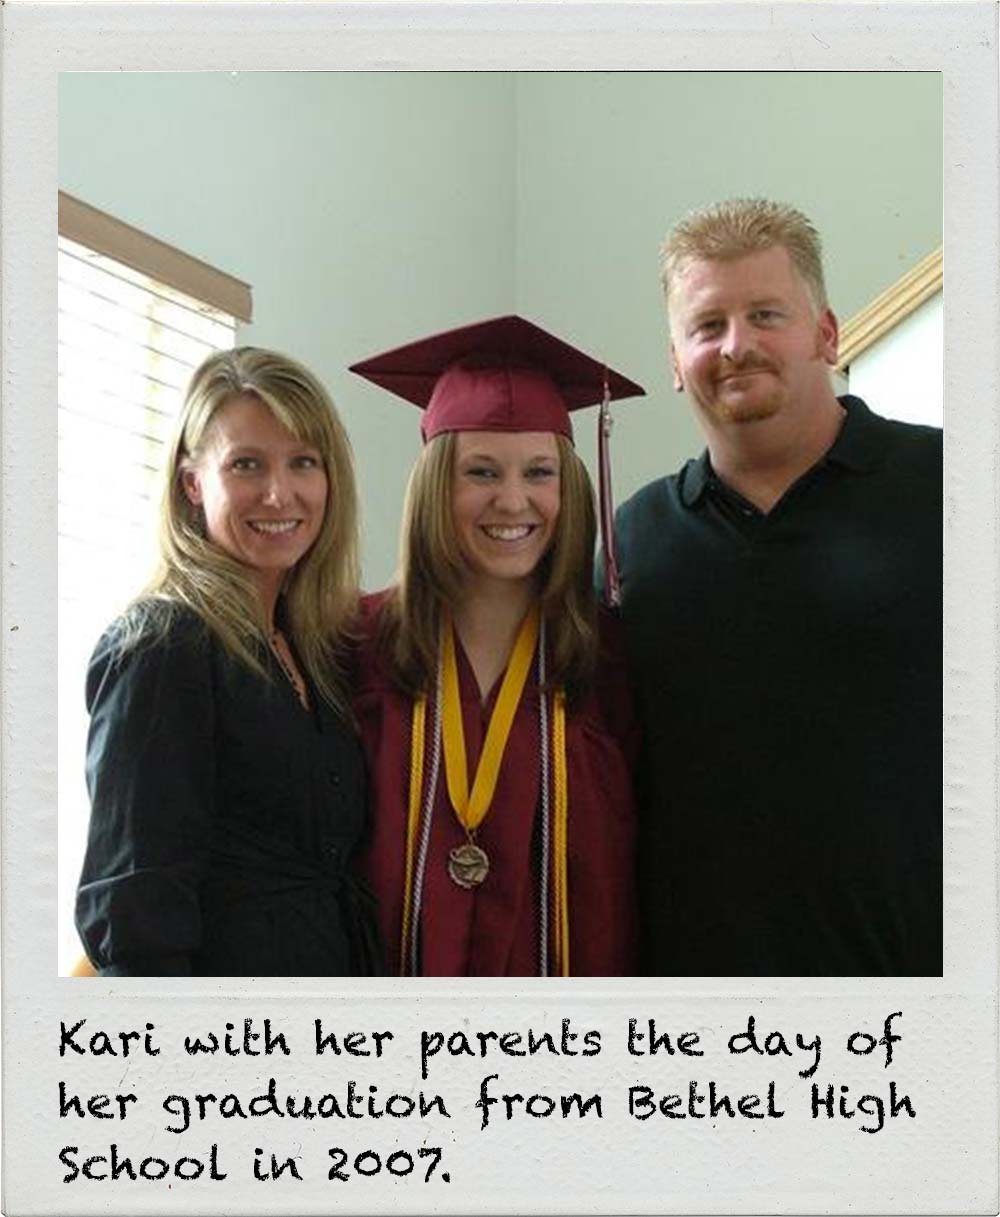 Kari with her parents the day of her graduation from Bethel High School in 2007.